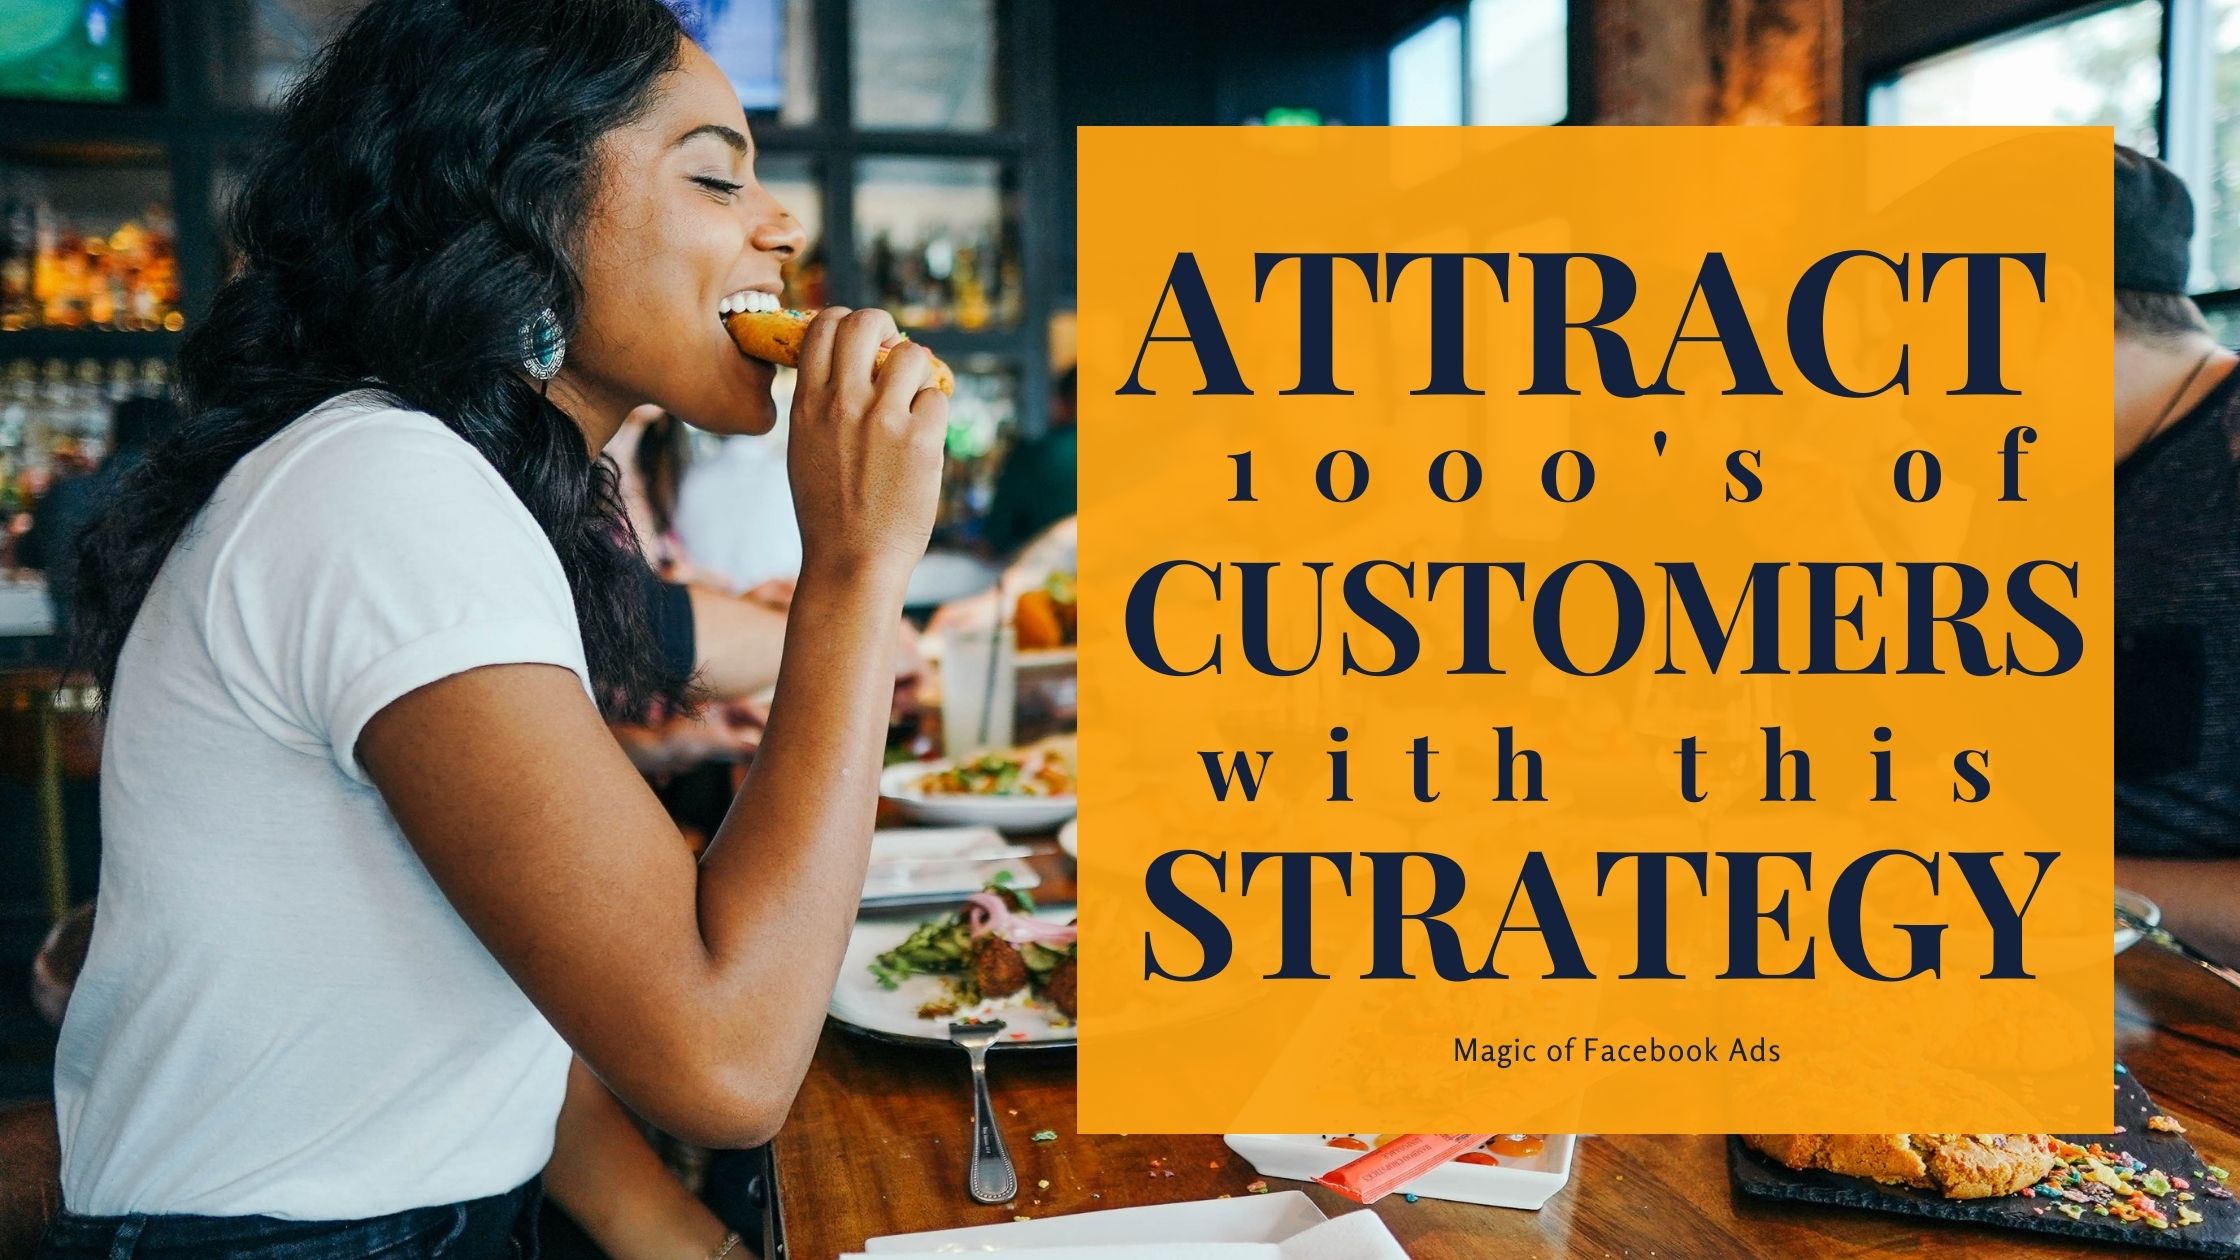 How to Attract Customers to a Restaurant